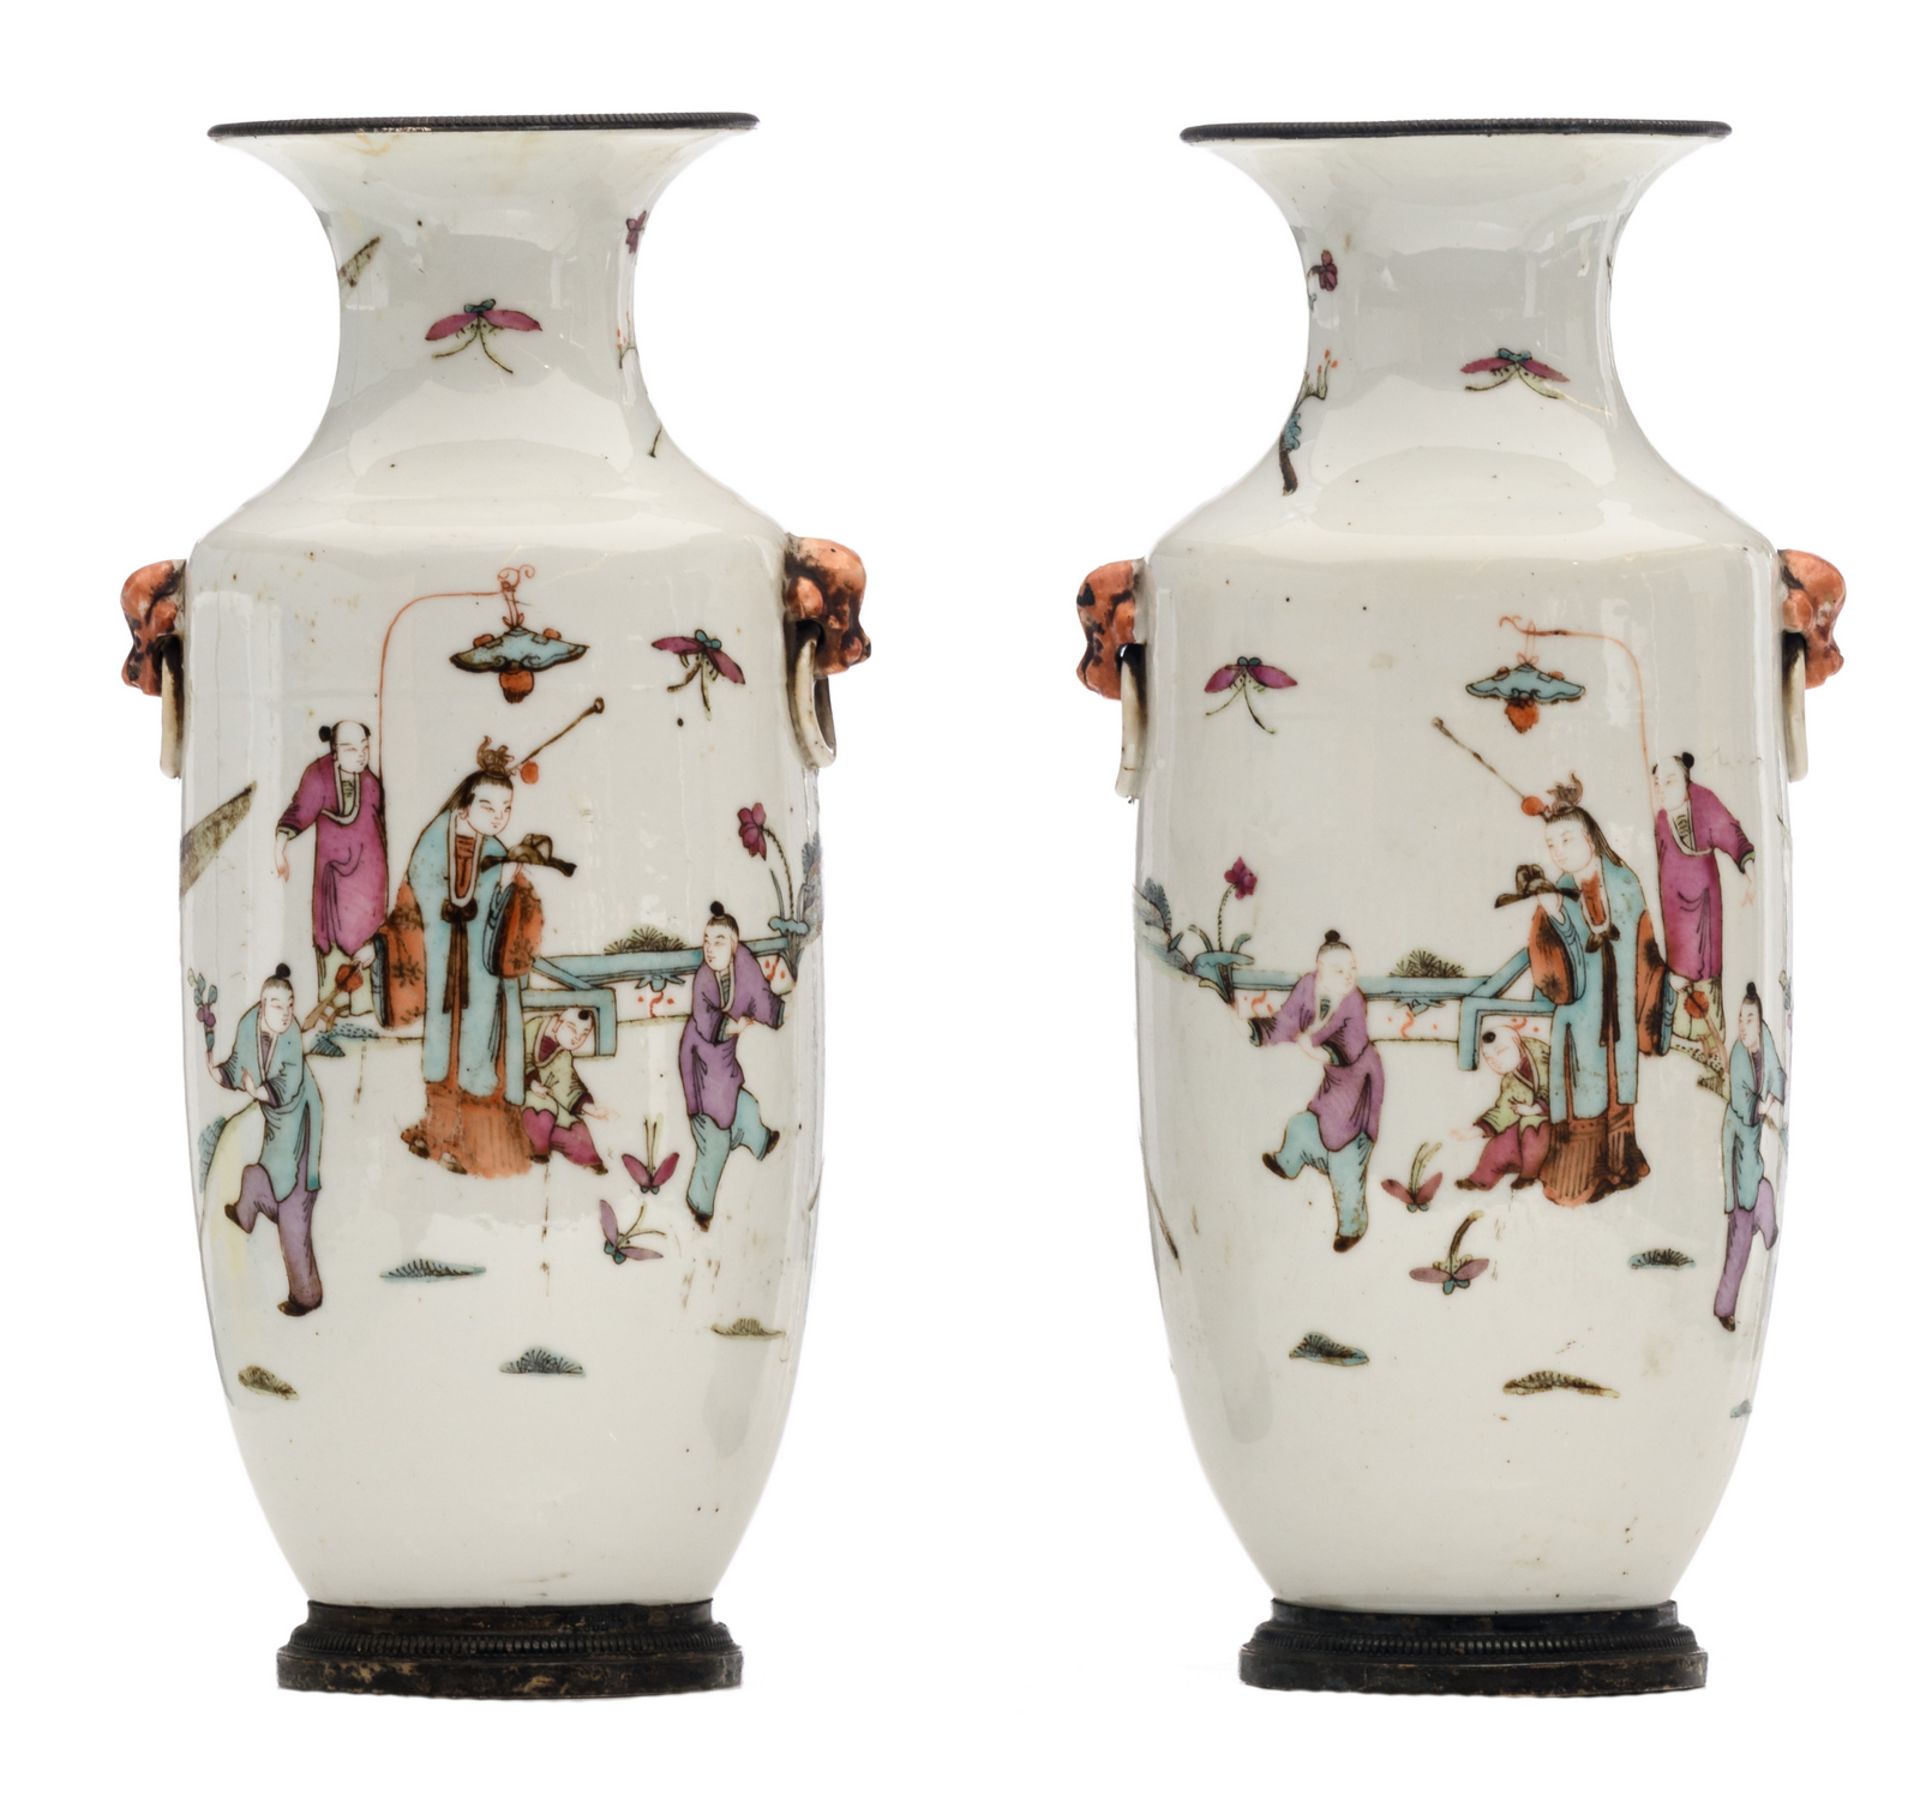 A pair of Chinese famille rose vases, overall decorated with an animated scene, with silver